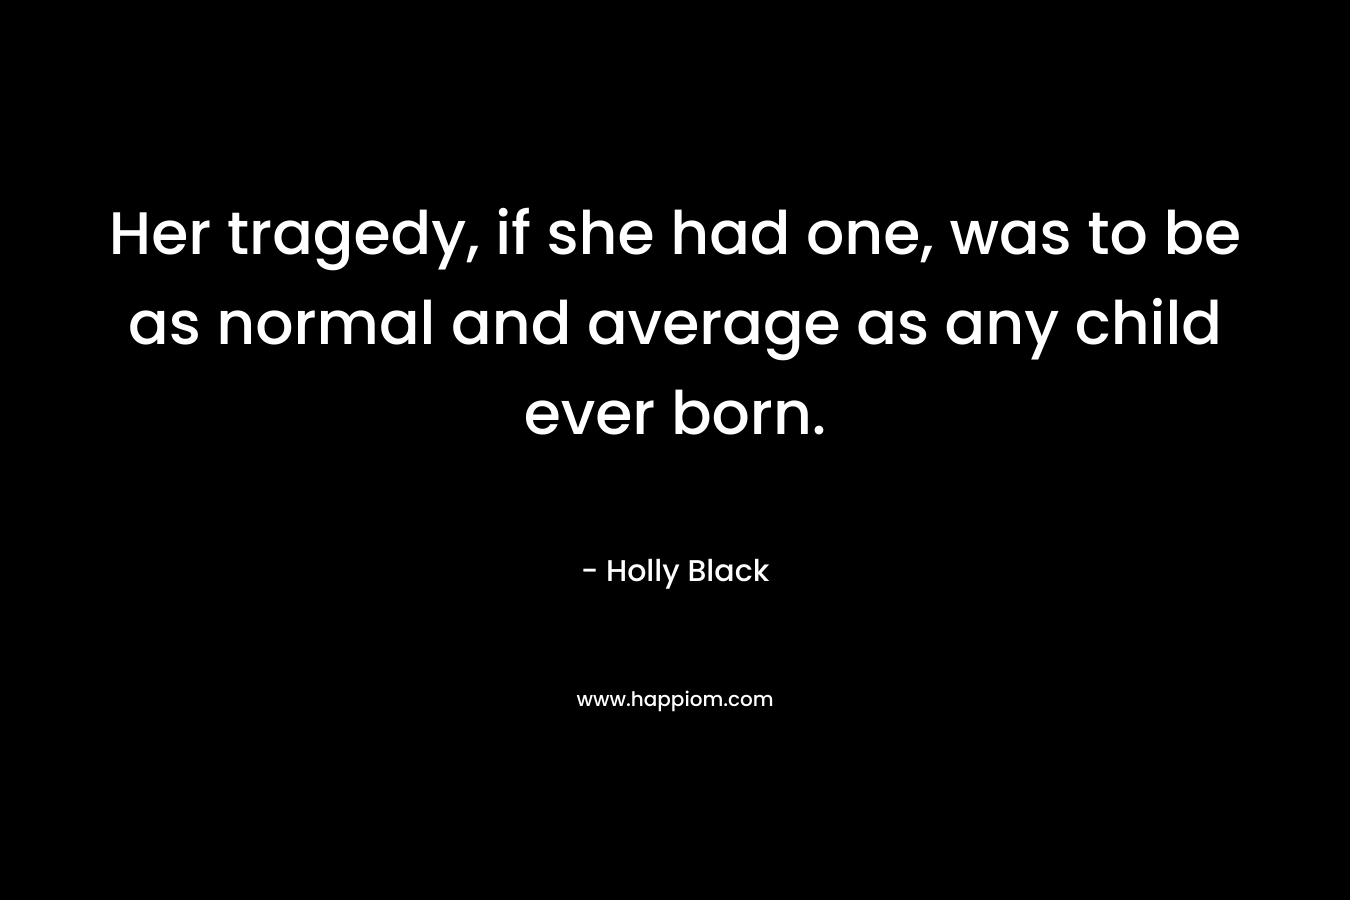 Her tragedy, if she had one, was to be as normal and average as any child ever born.